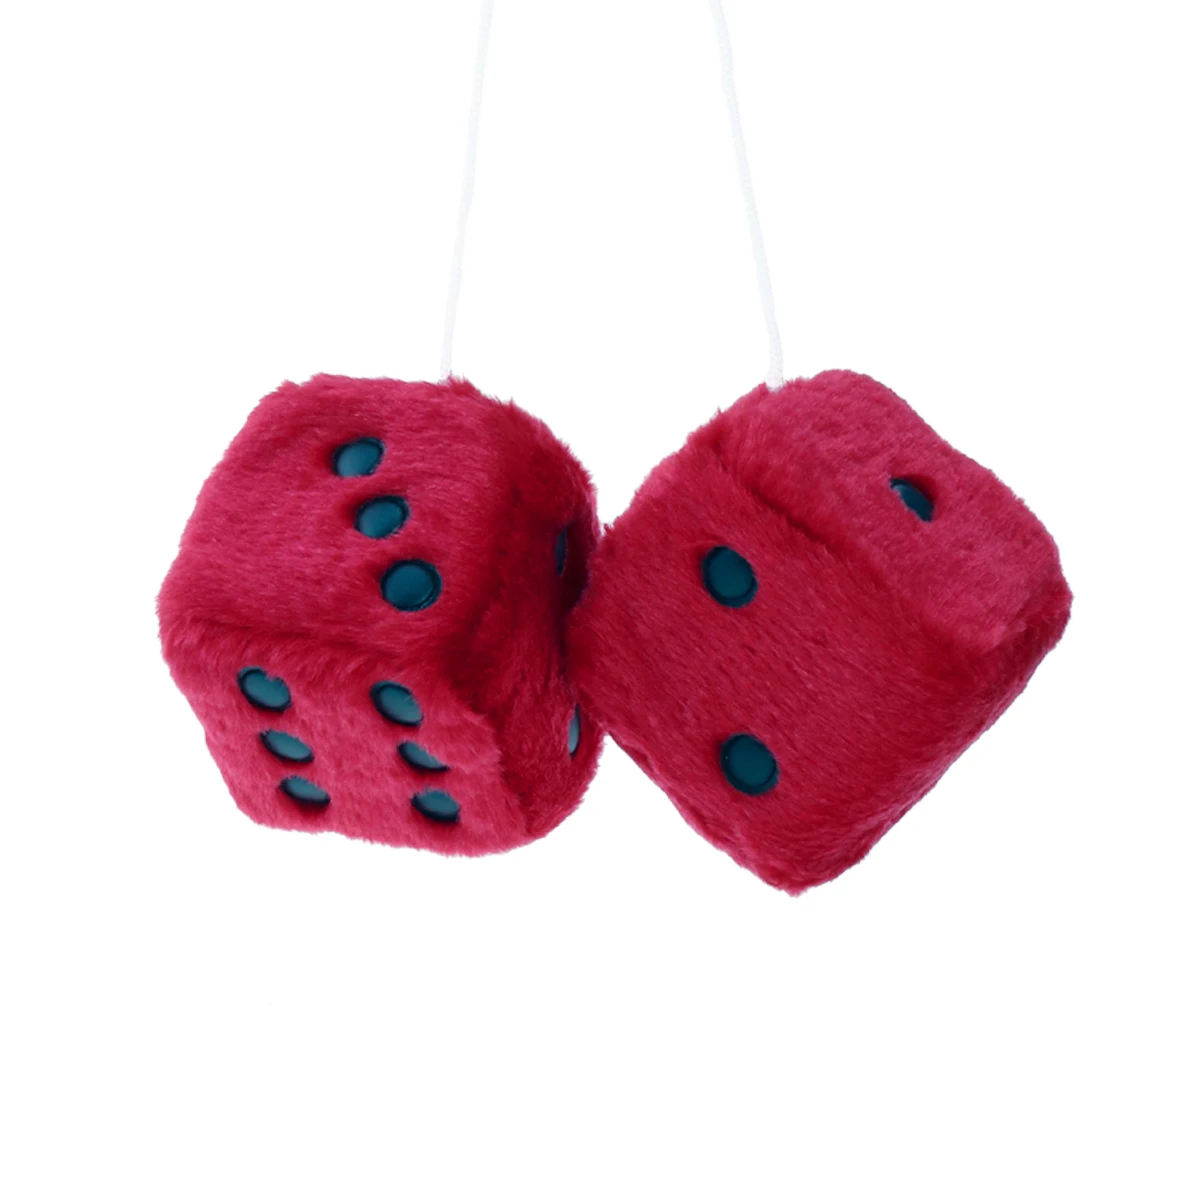 1 Pair Large Red 3 Inch Plush Fuzzy Soft Dice Great for Hanging on Rearview Car Mirror